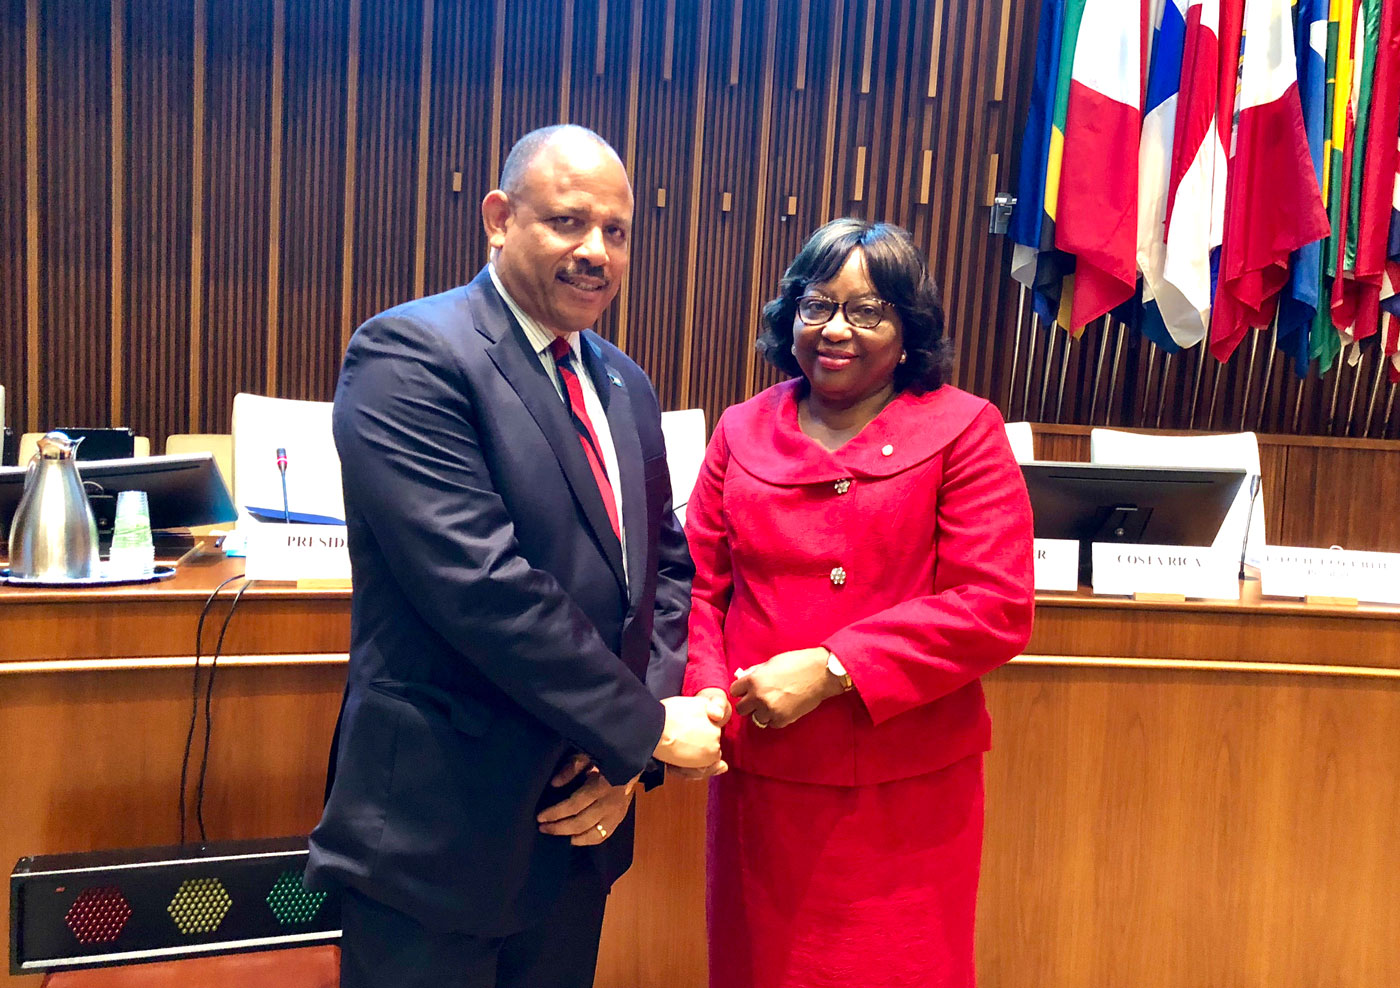 Bahamian Minister of Health elected President of the Pan American Health Organization’s 56th Directing Council